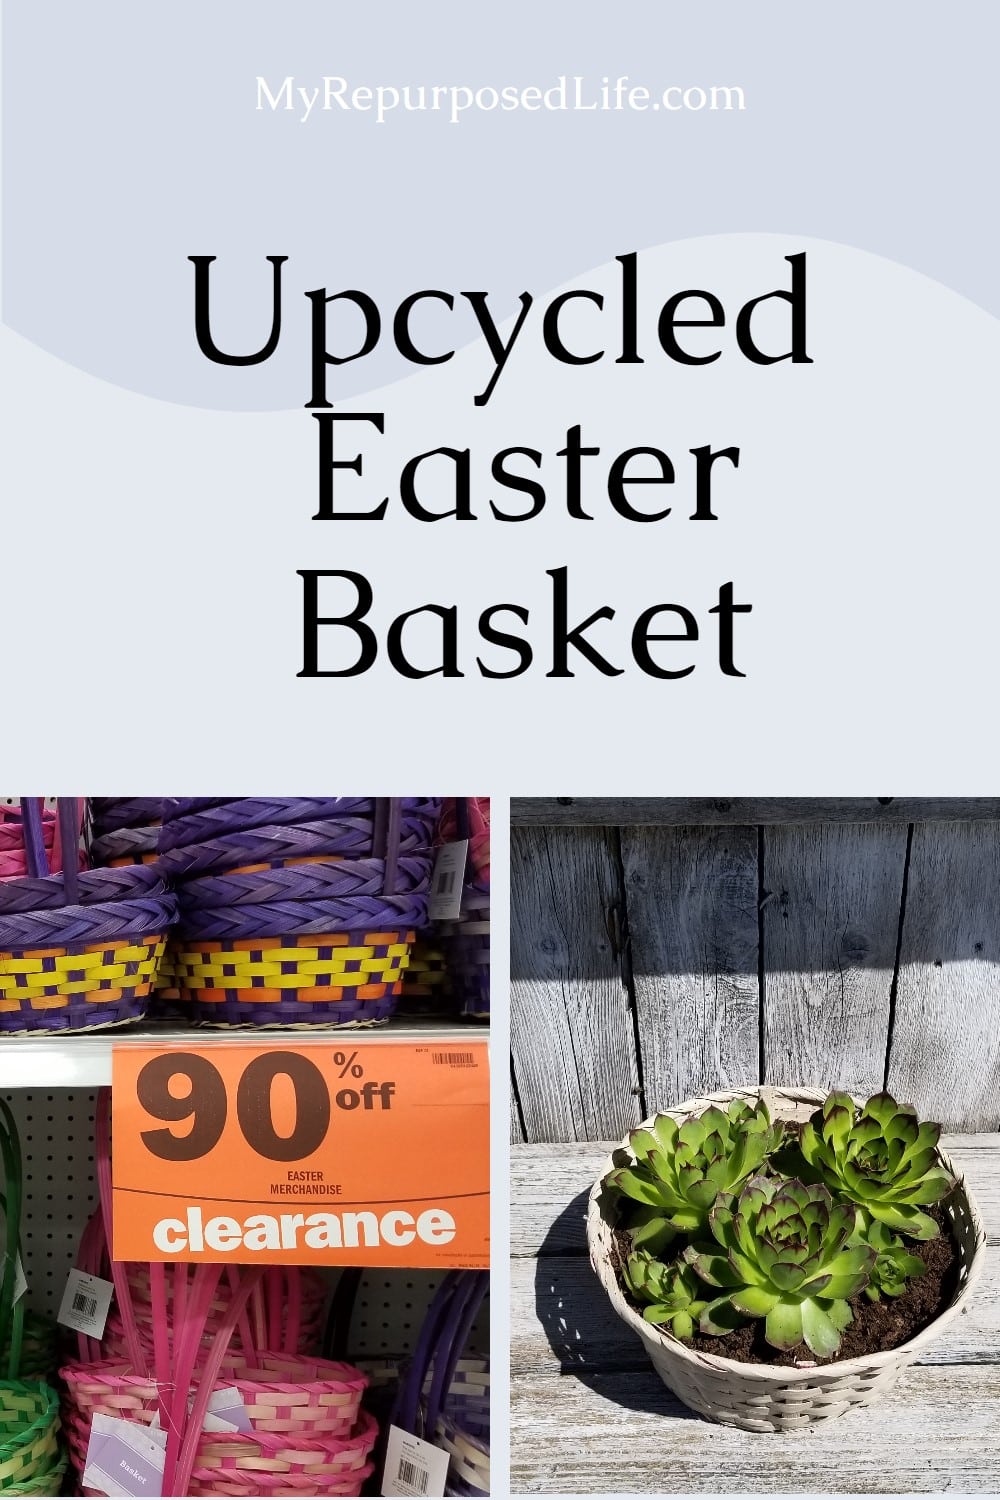 How to make a basket succulent planter out of a clearance priced wicker Easter basket. I used an Easter basket, you could easily update a thrift store basket in the same way. This easy spray paint project will have you looking at baskets in a whole new way. #MyREpurposedLife via @repurposedlife